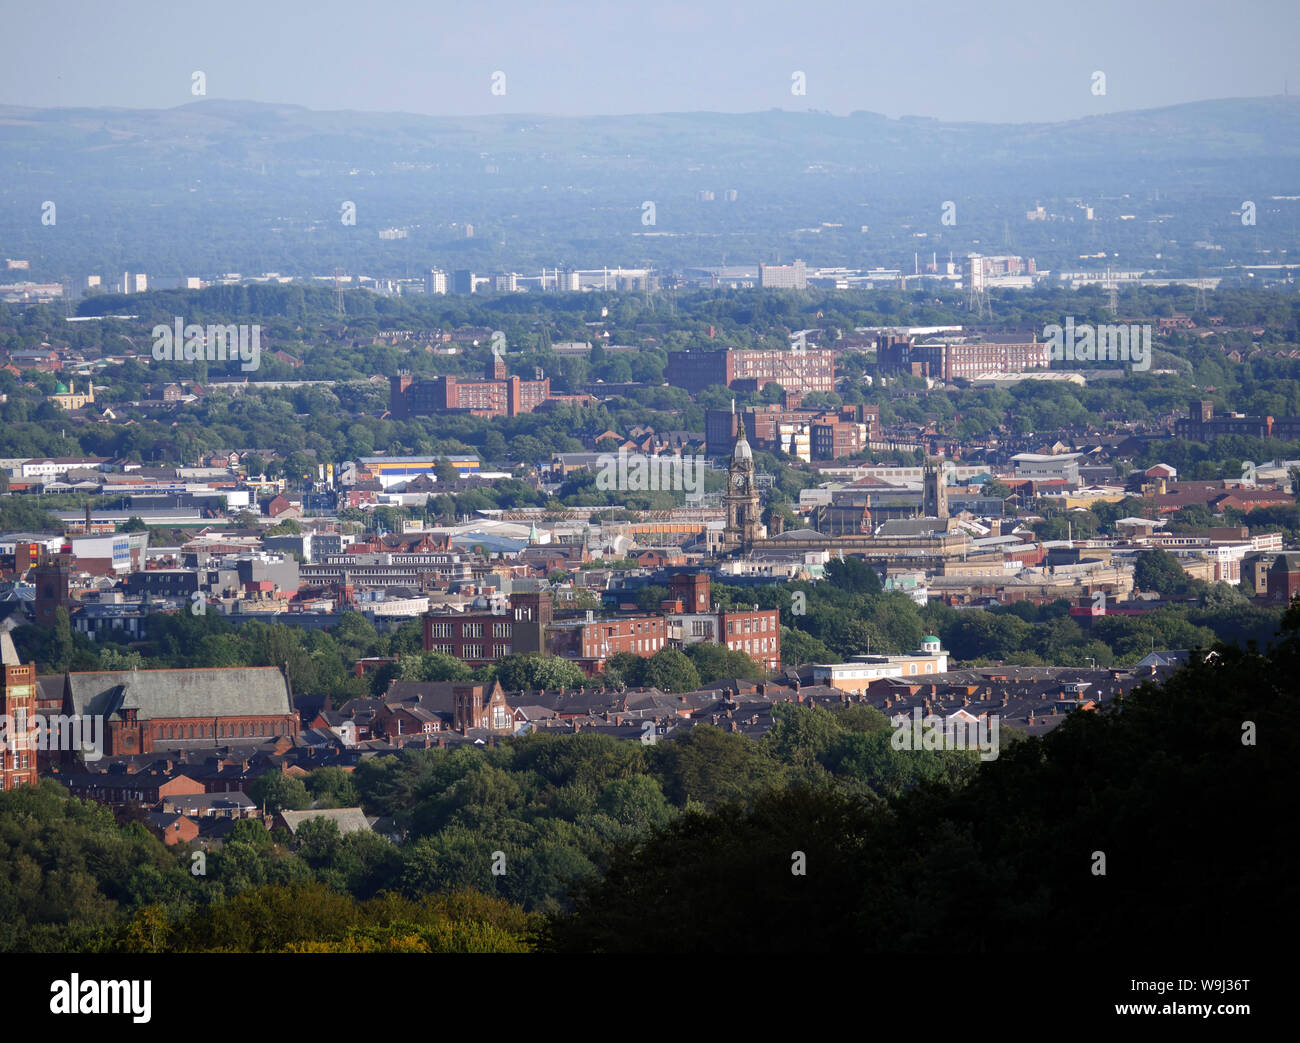 View looking over the town of Bolton with the city Manchester in the distance. Bolton Town Hall central right. photo DON TONGE Stock Photo